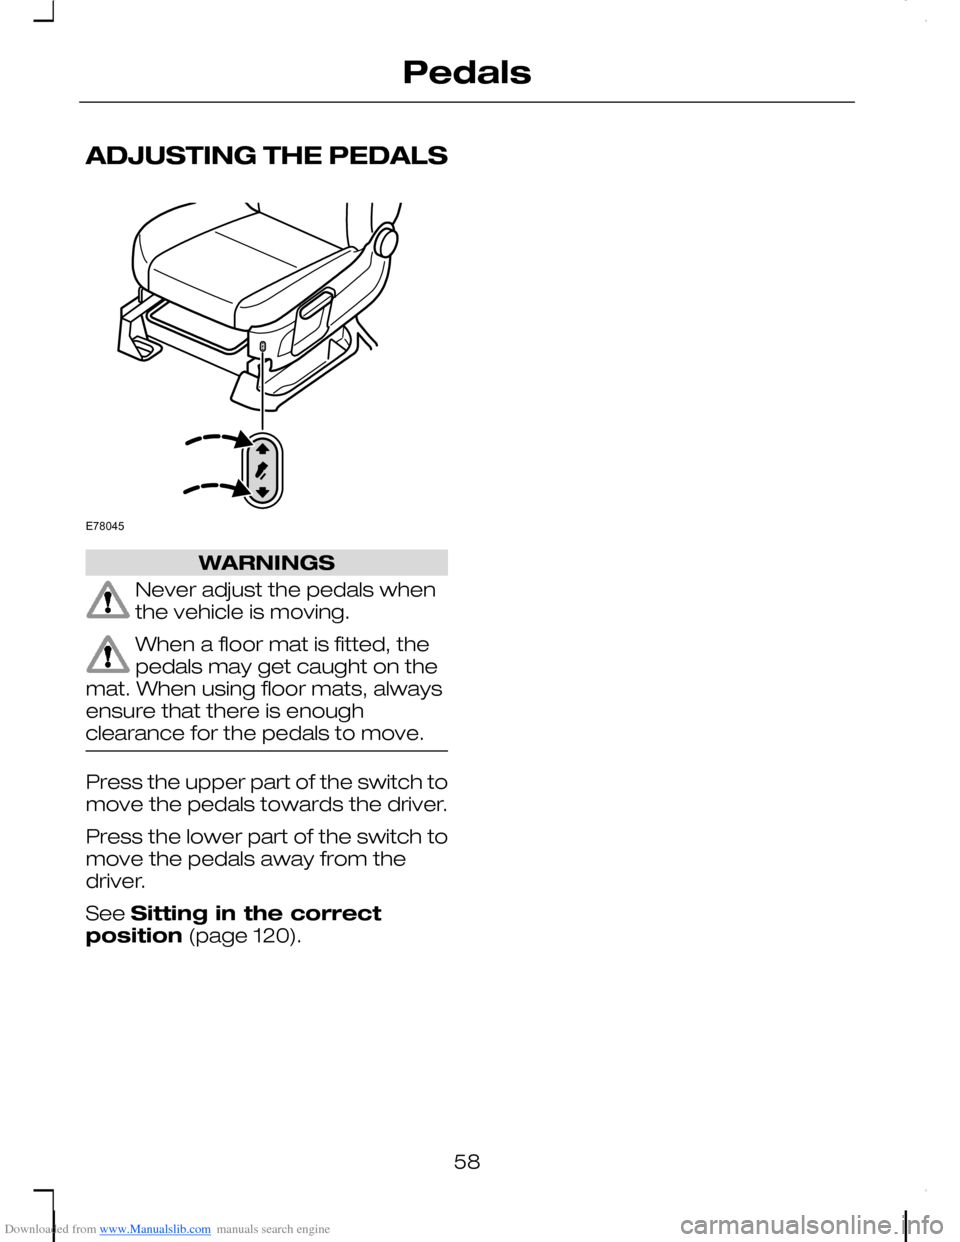 FORD C MAX 2008 1.G Owners Manual Downloaded from www.Manualslib.com manuals search engine ADJUSTING THE PEDALS
WARNINGS
Never adjust the pedals whenthe vehicle is moving.
When a floor mat is fitted, thepedals may get caught on themat